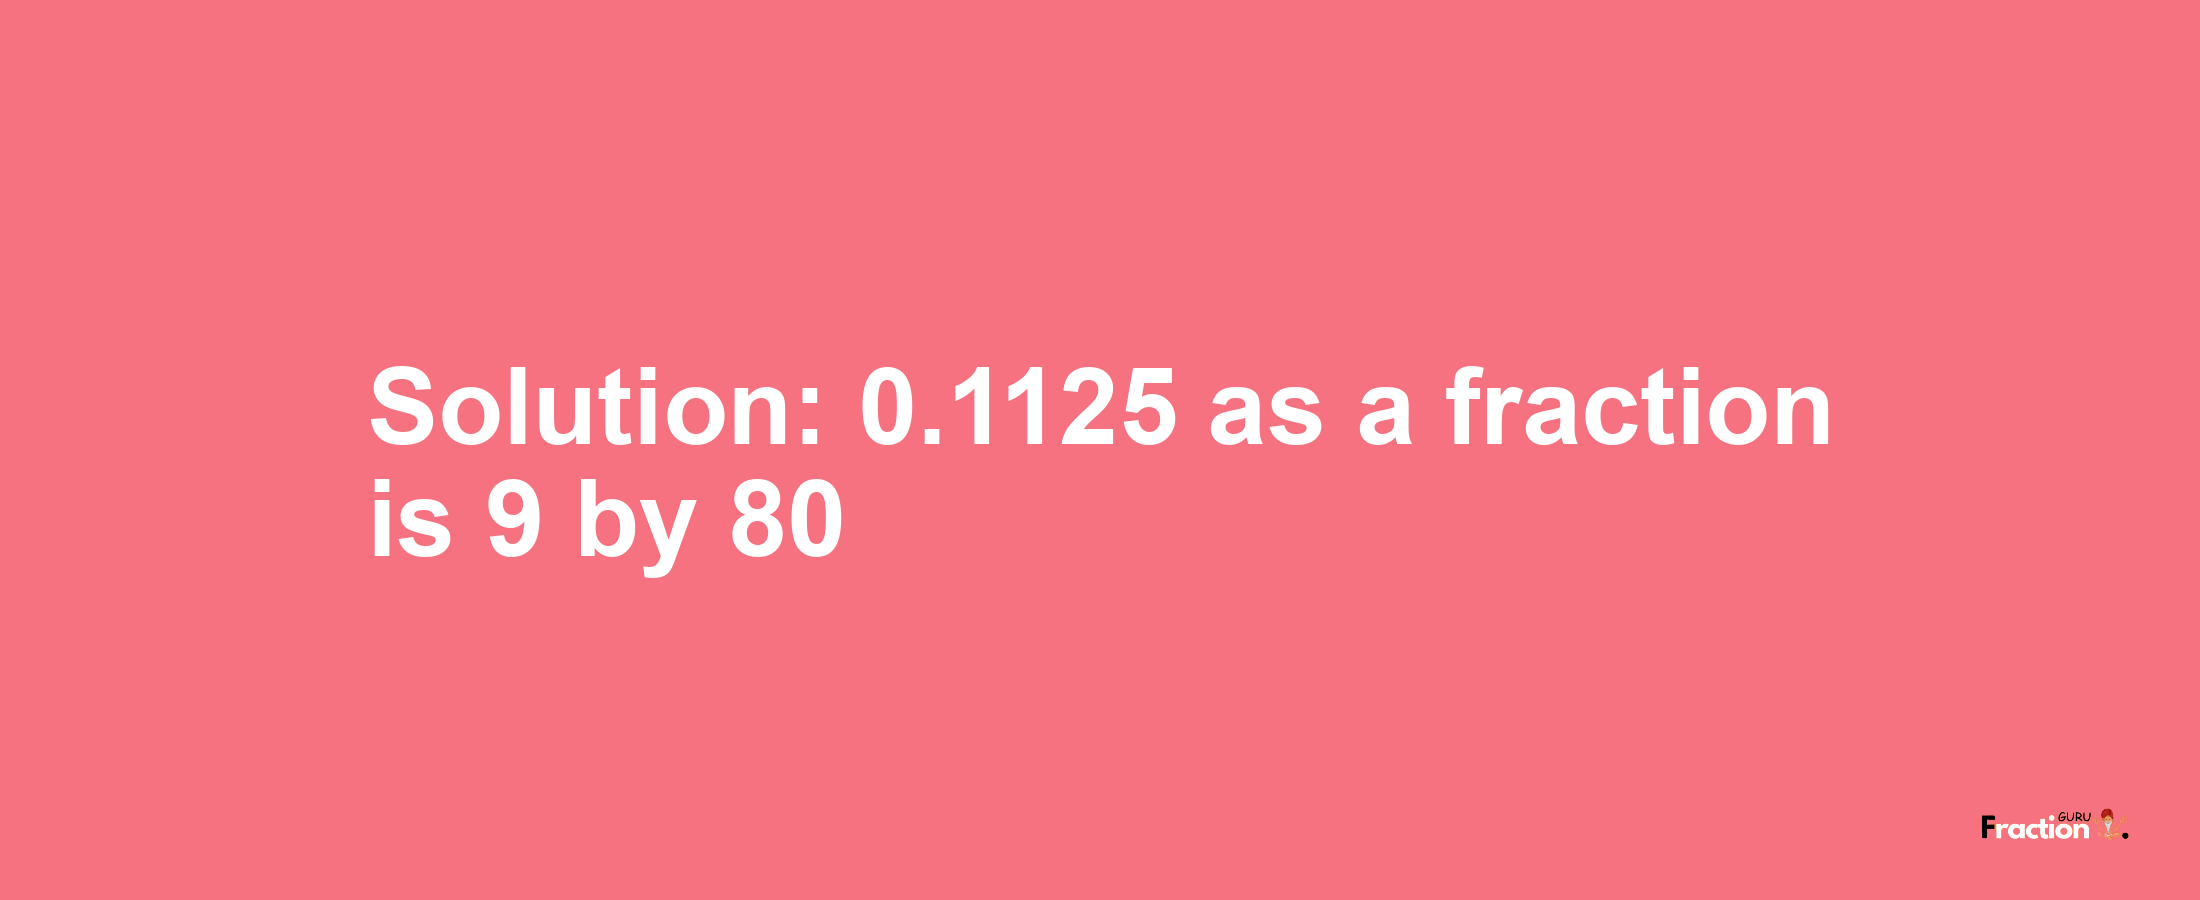 Solution:0.1125 as a fraction is 9/80